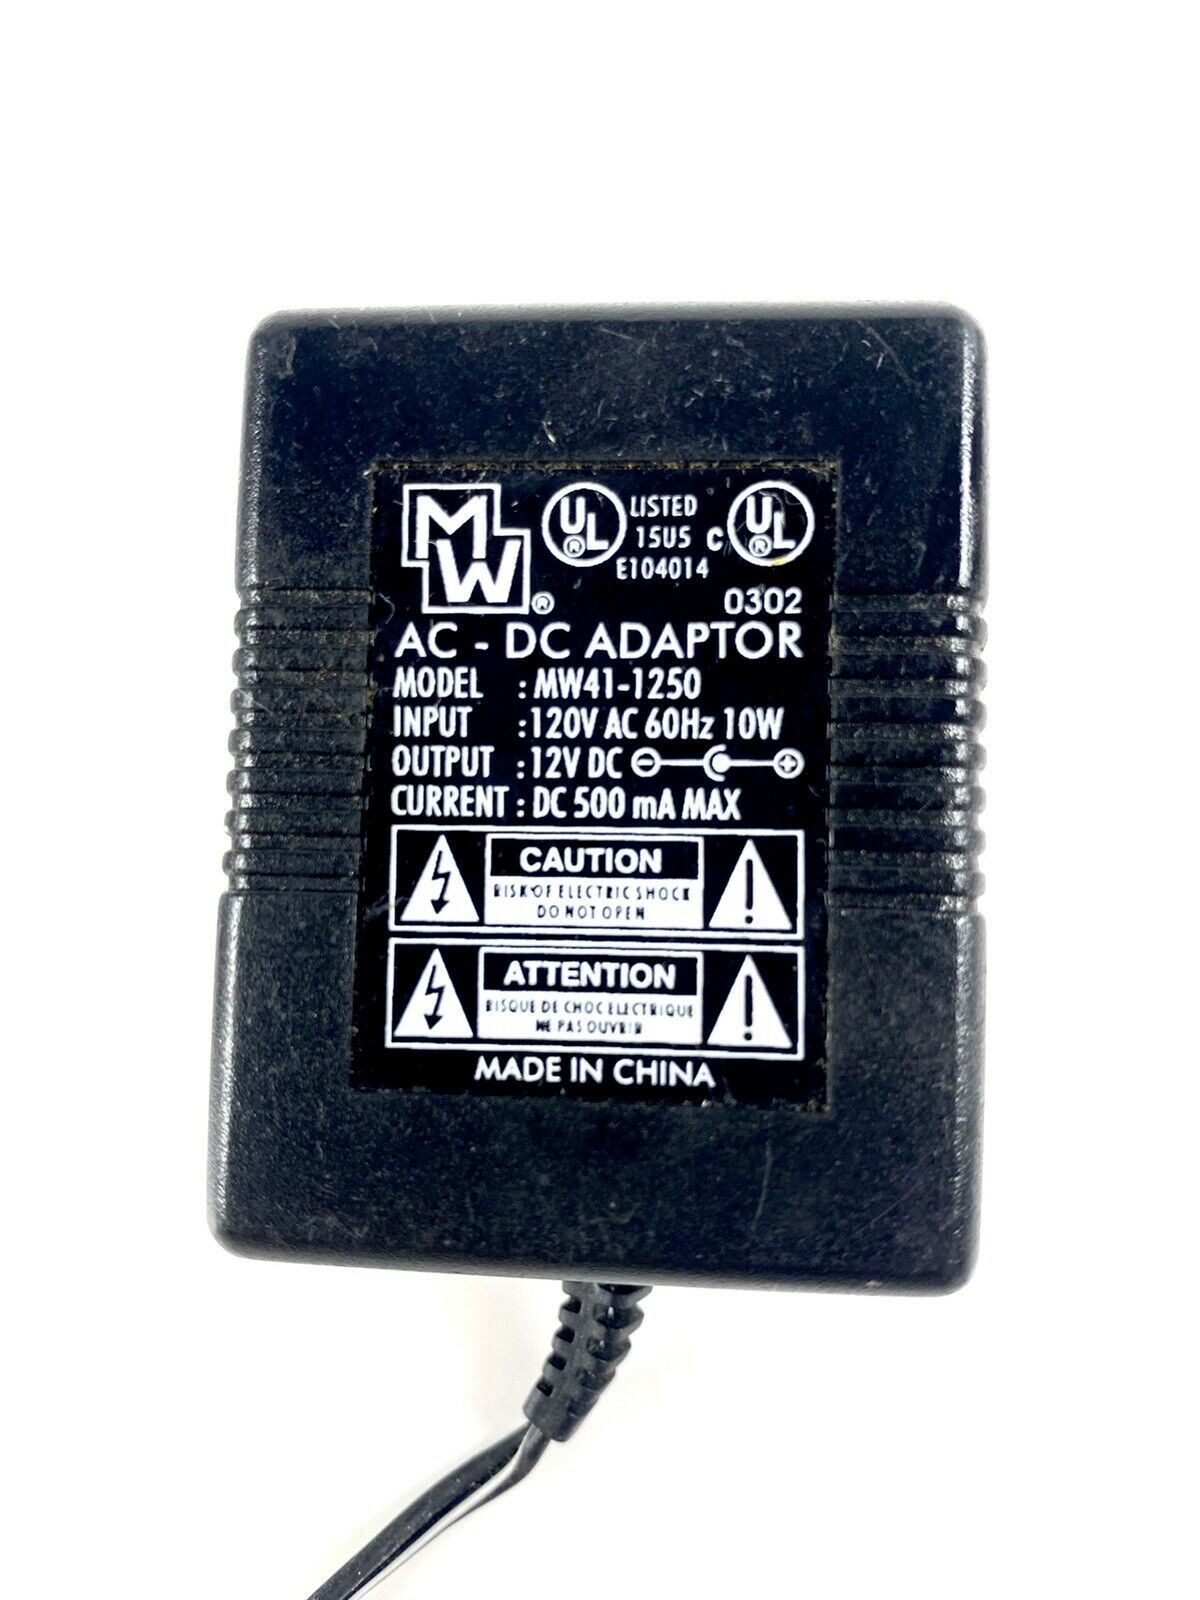 US Power adapter AC/DC 12V 500mA 2.5MM X 5.5MM MW41-1250 Brand: Unbranded Type: Adapter Connection Split/Duplication - Click Image to Close